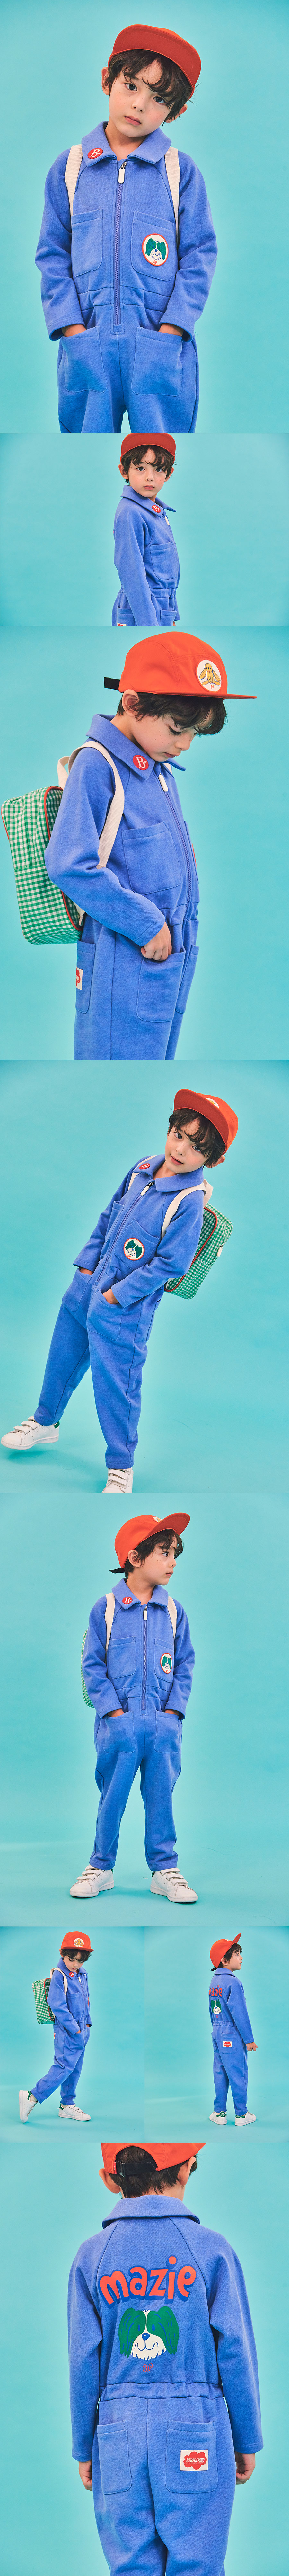 Mazie out pocket zip up jump suit 상세 이미지